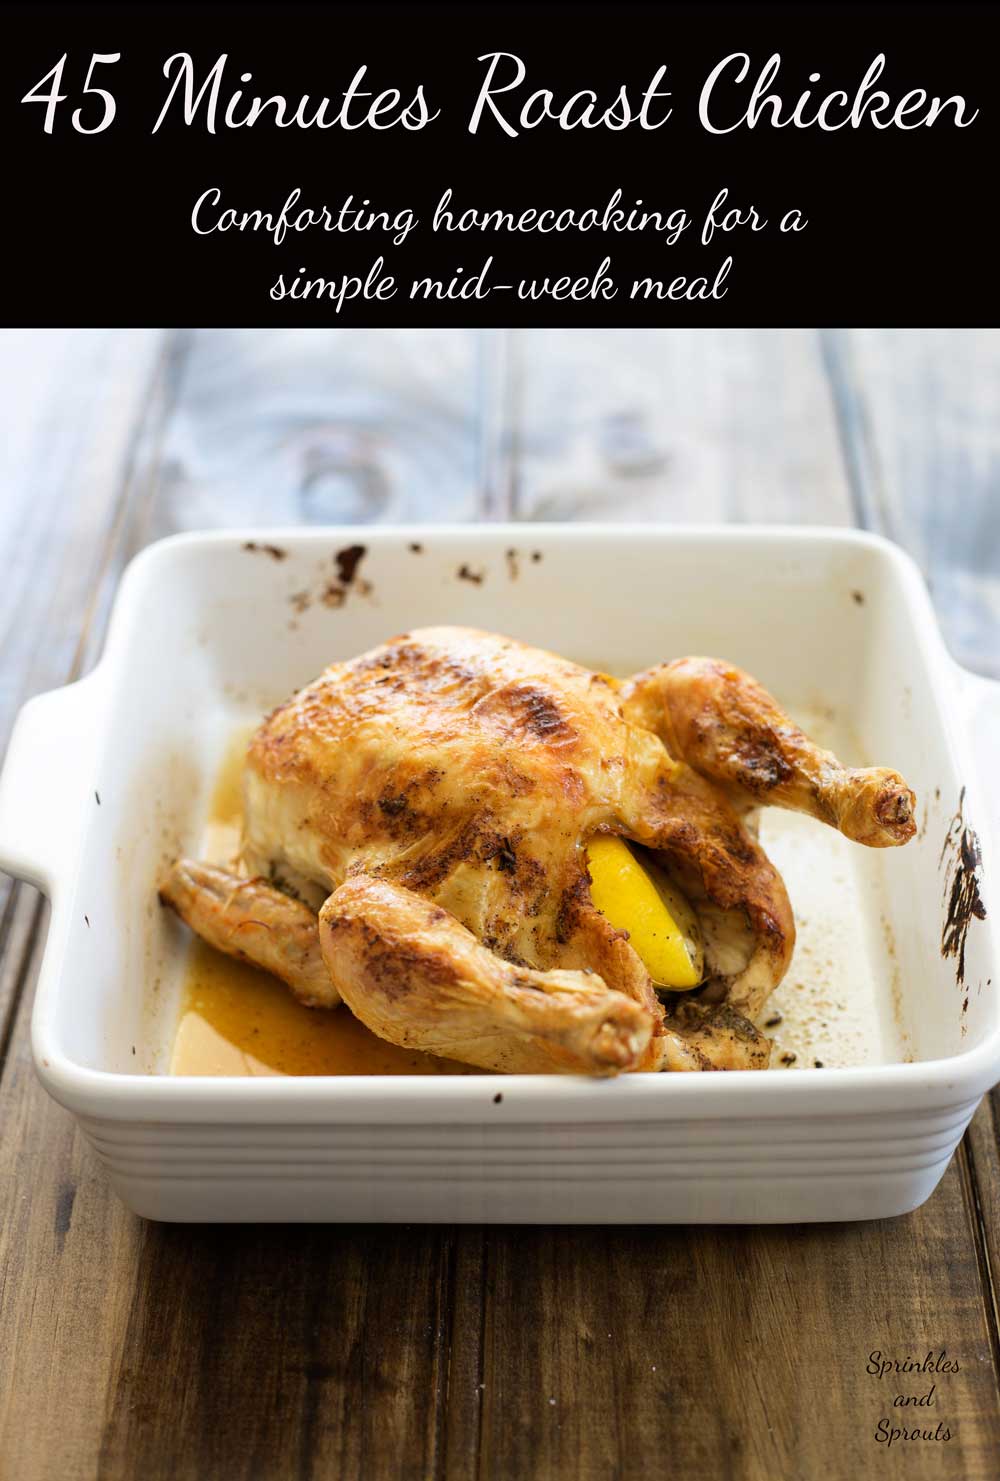 45 Minute Roast Chicken with Rosemary and Garlic. The ultimate comfort food and on the table in under an hour. Crispy skin, succulent meat and simple to make.